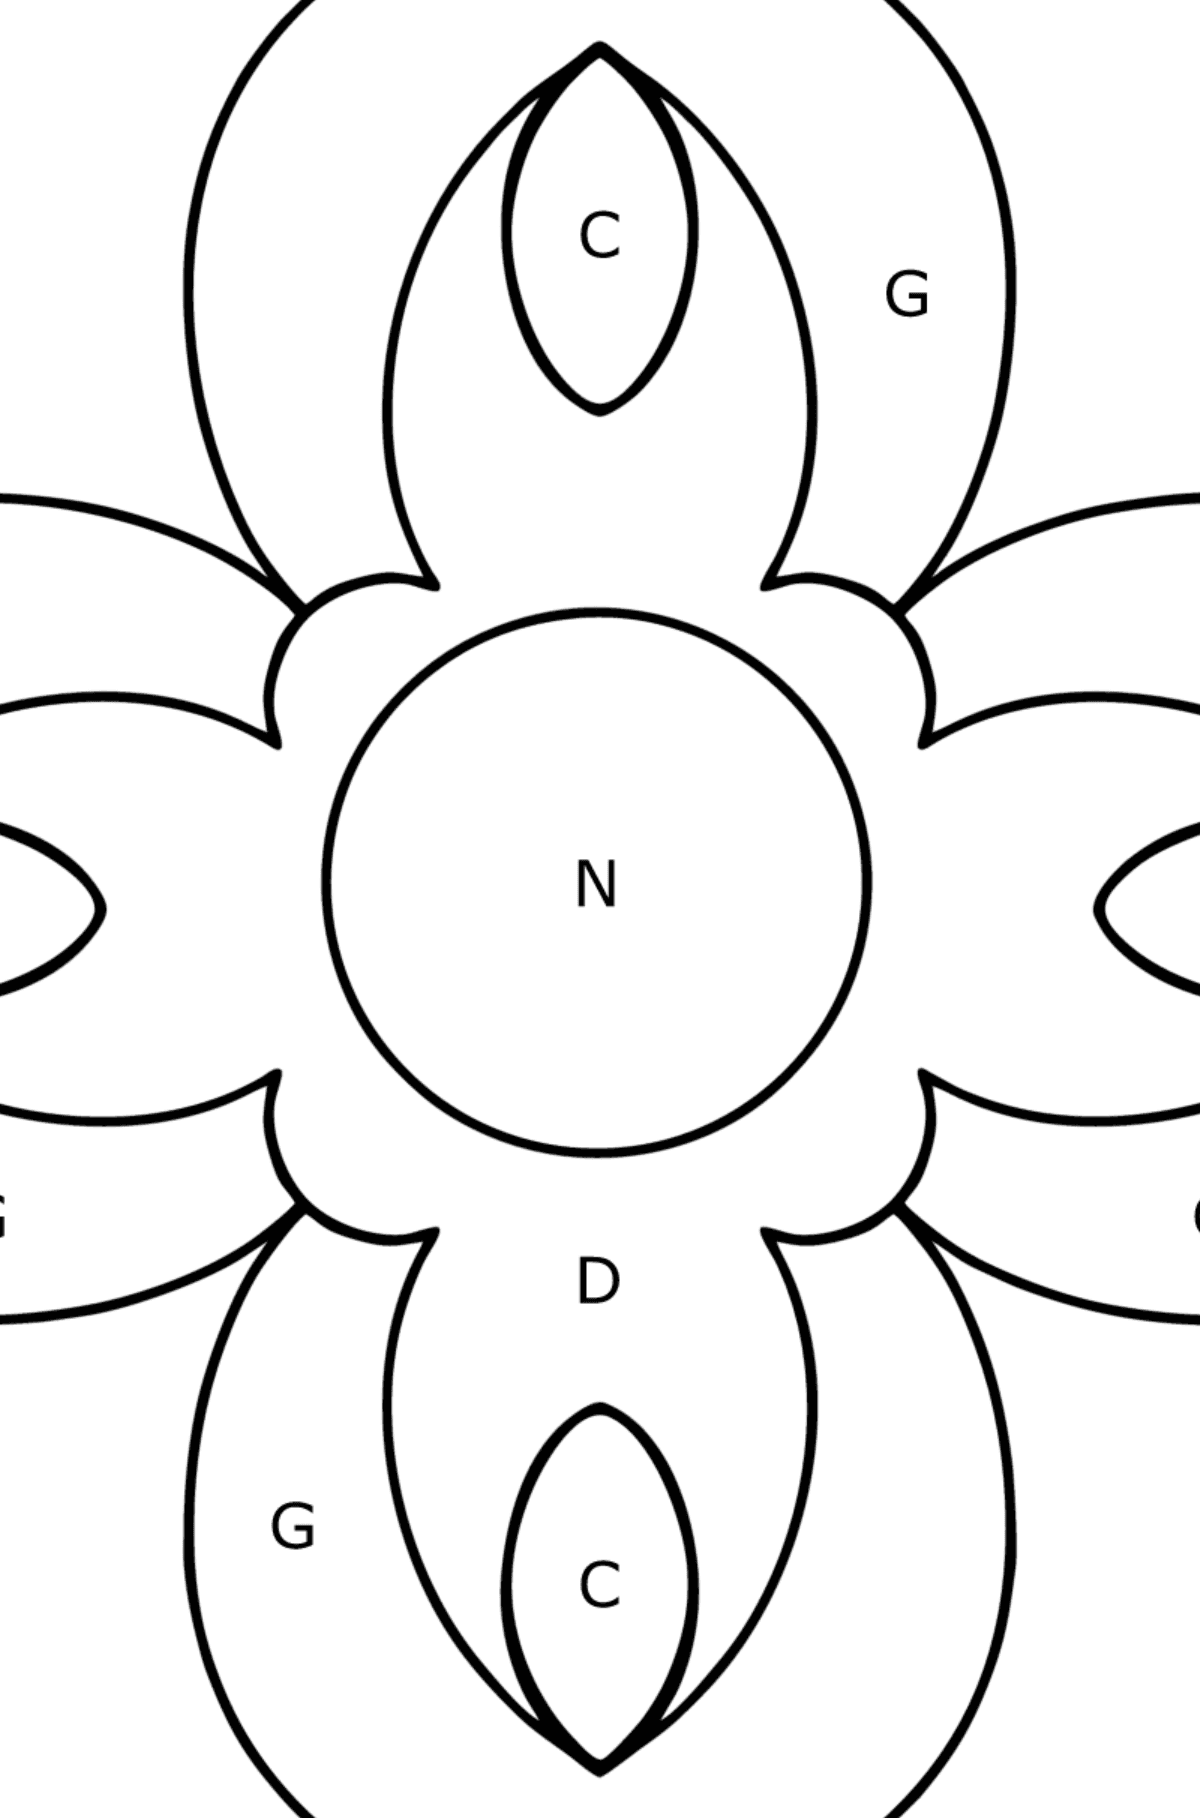 Coloring book for kids - Anti stress flower - Coloring by Letters for Kids